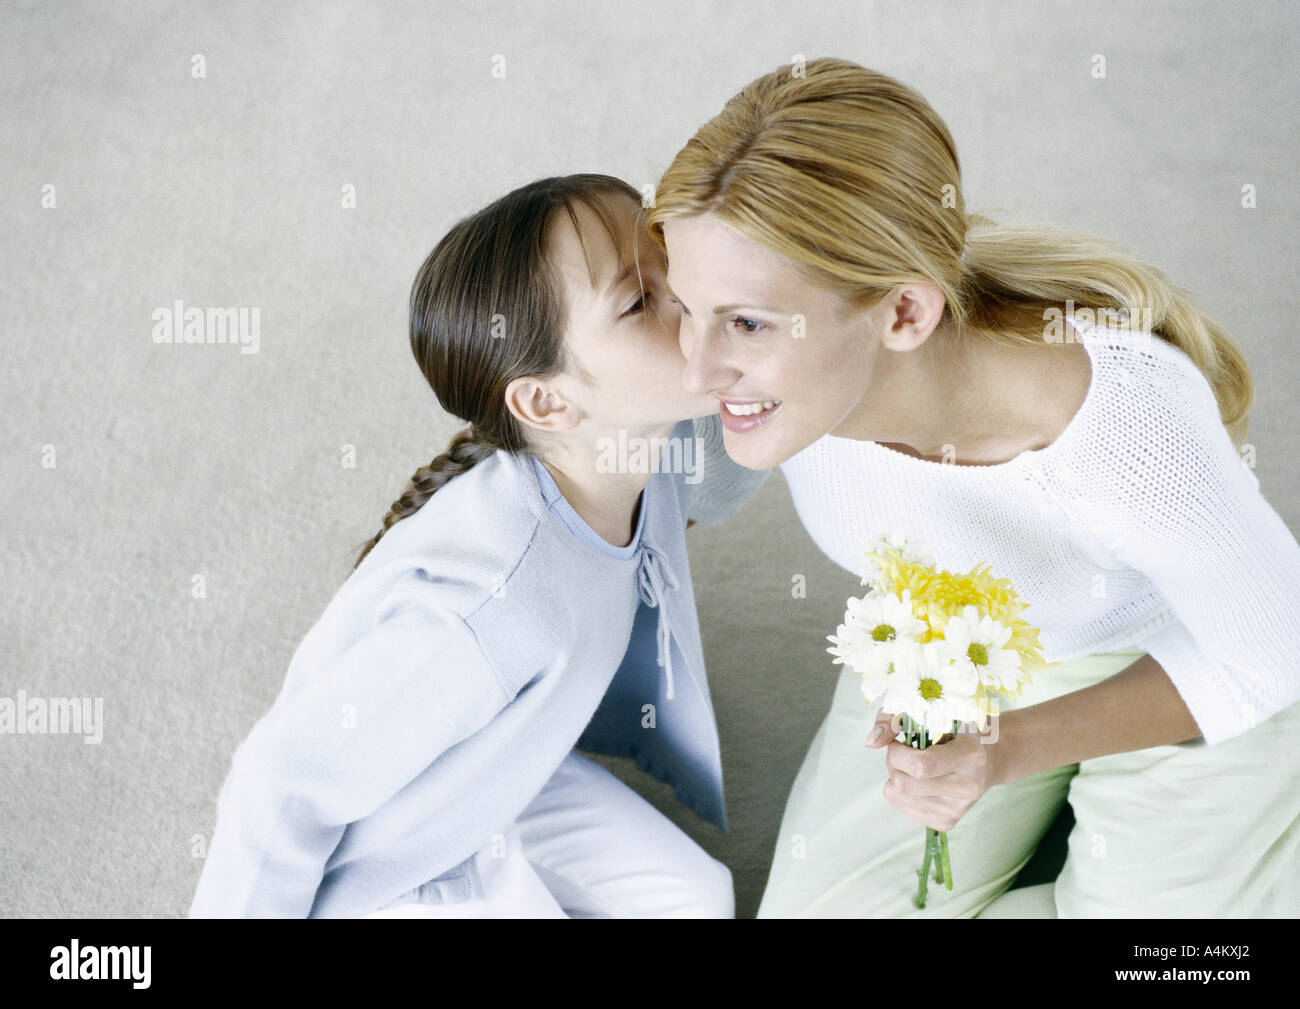 Woman holding bouquet of flowers, girl kissing her cheek Stock Photo